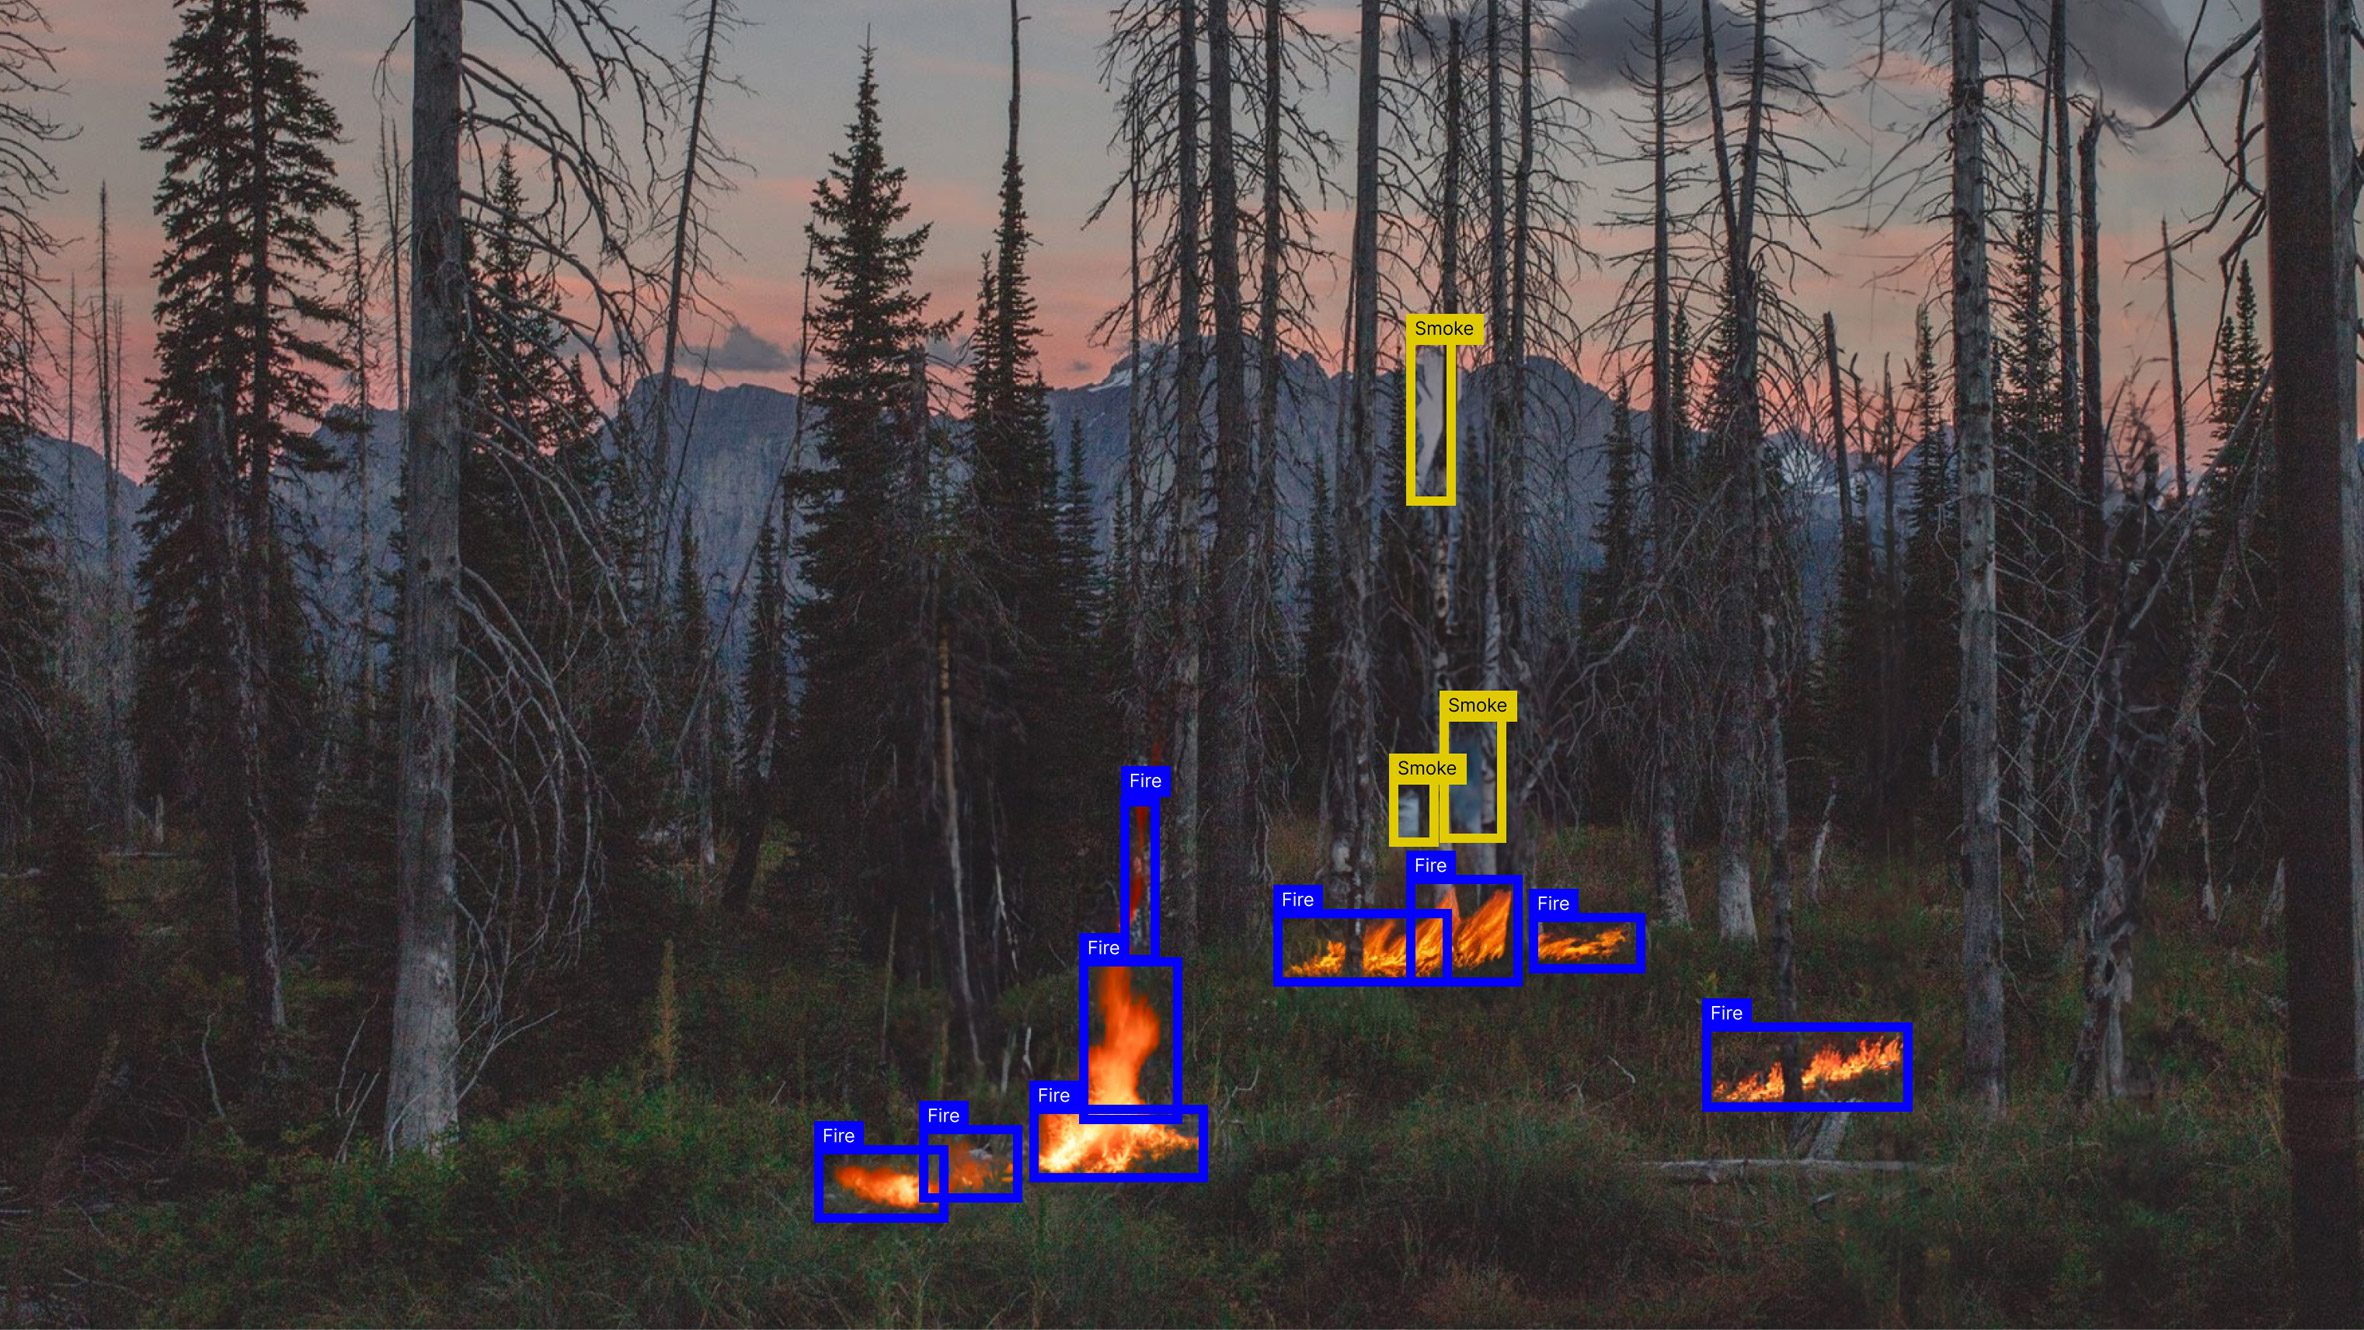 Solar Lookout wildfire detection system capturing images of smoke and fire 